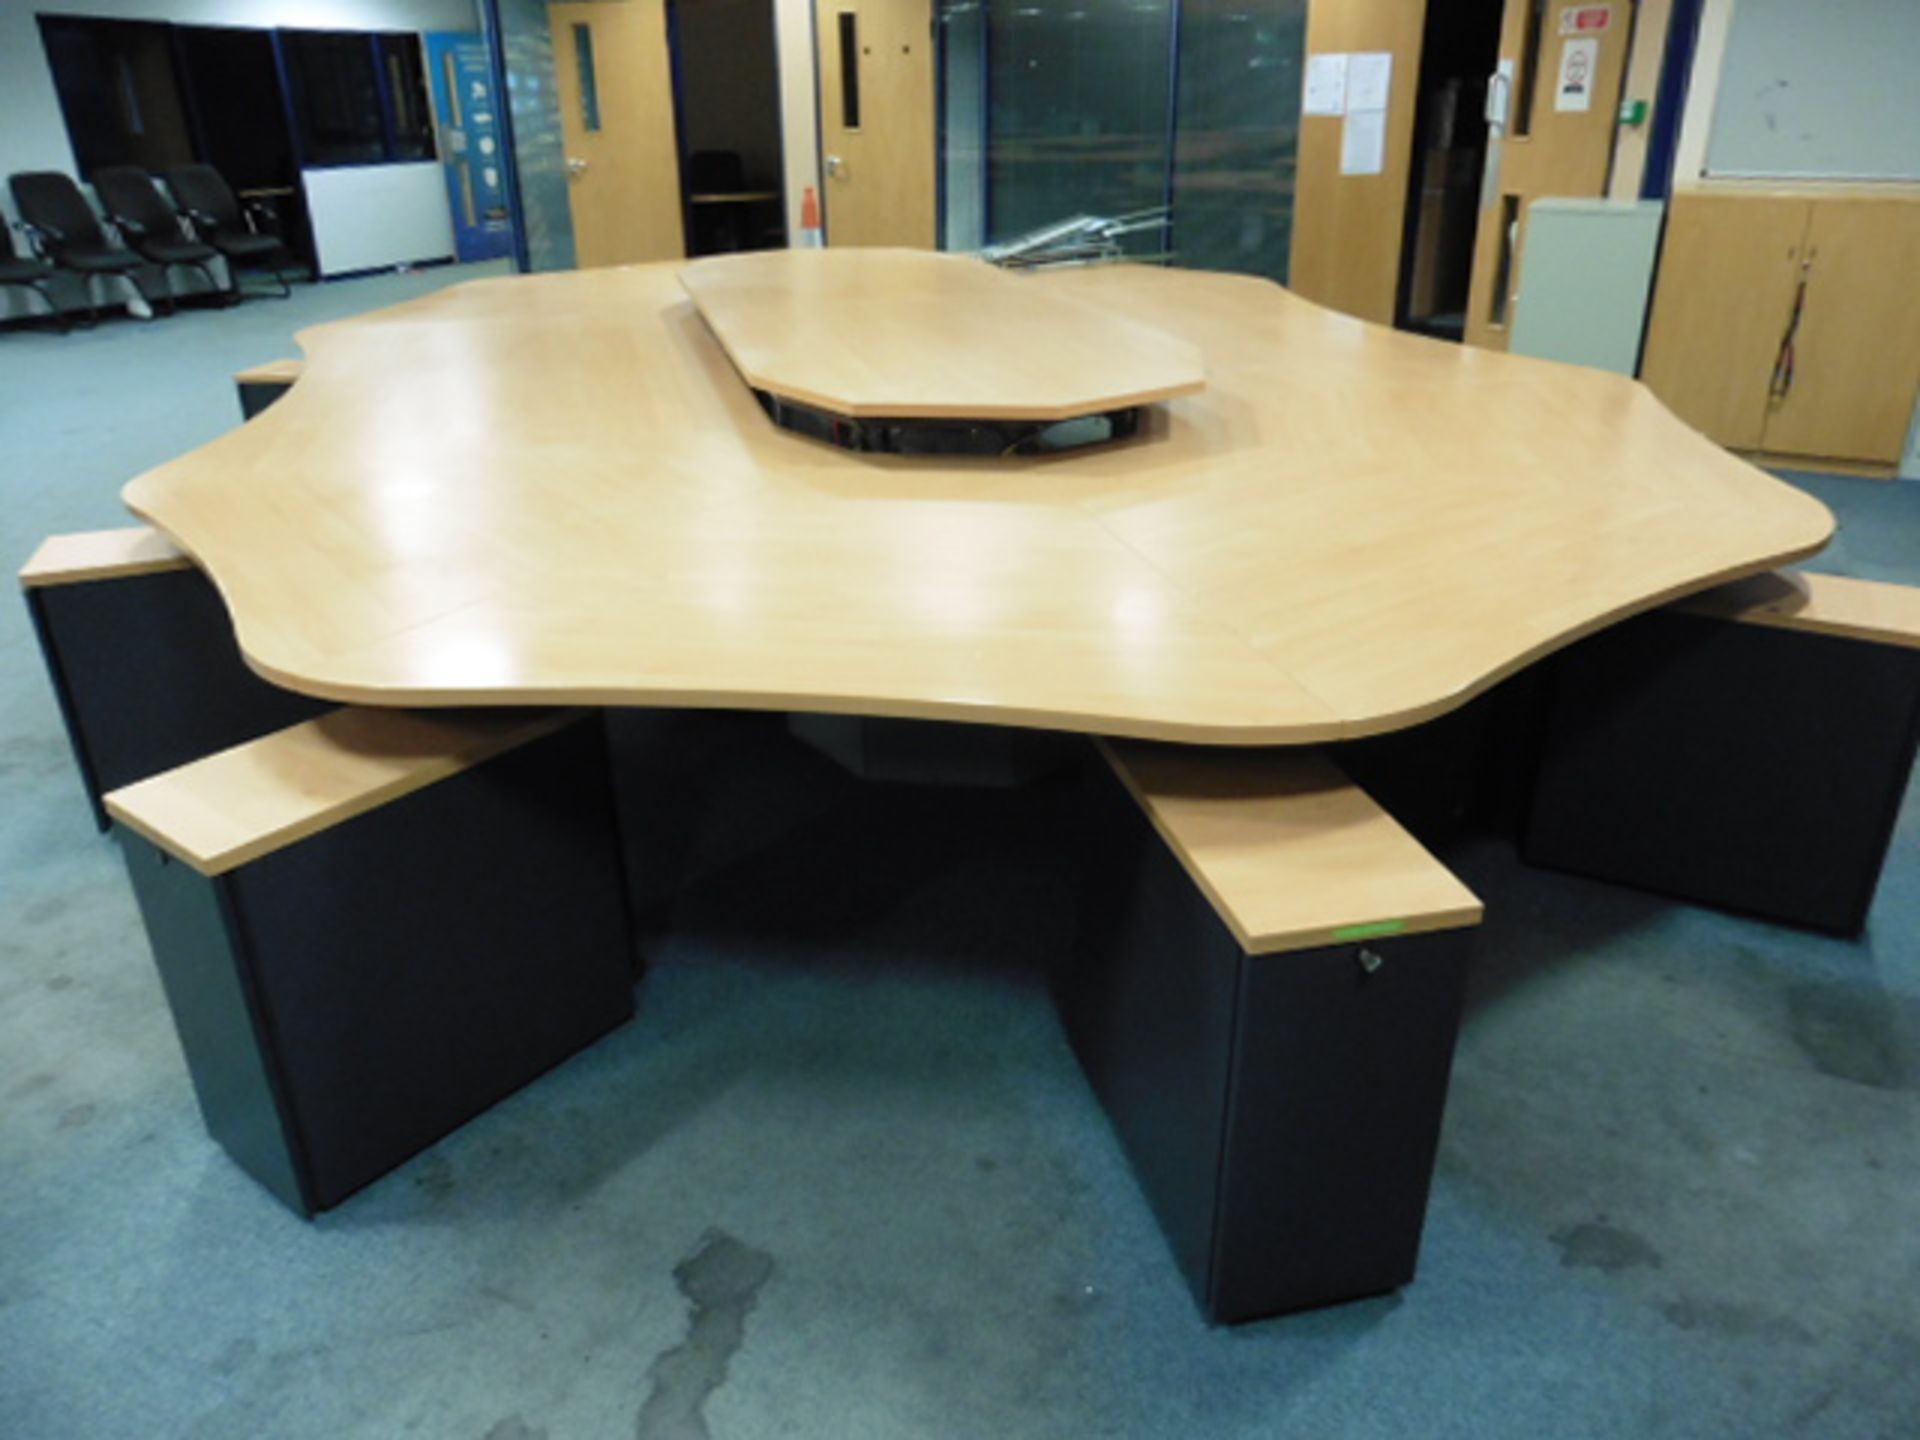 Call centre 10 station modular desk pod finished in beech and grey, comes with 10 free standing - Image 4 of 4